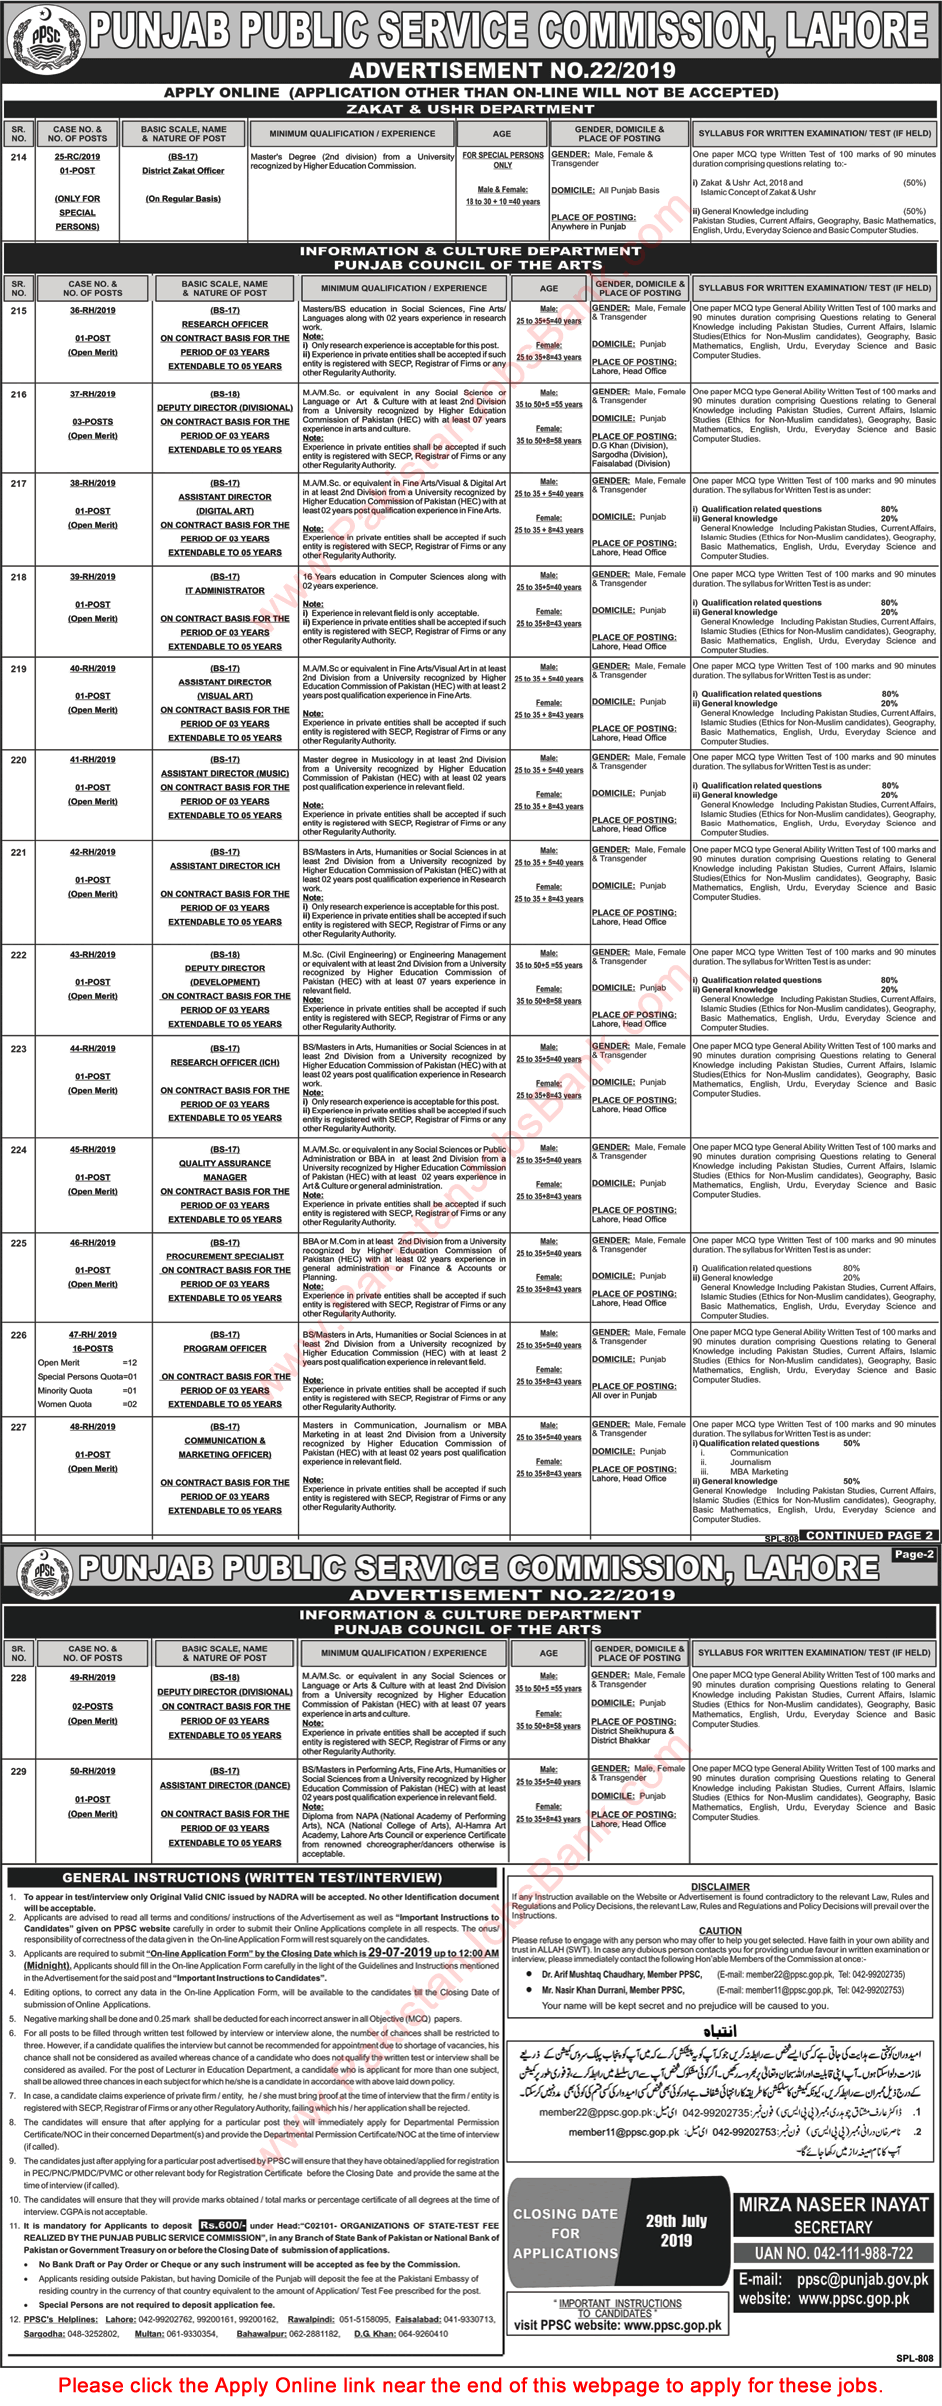 PPSC Jobs July 2019 Apply Online Consolidated Advertisement No 22/2019 Latest